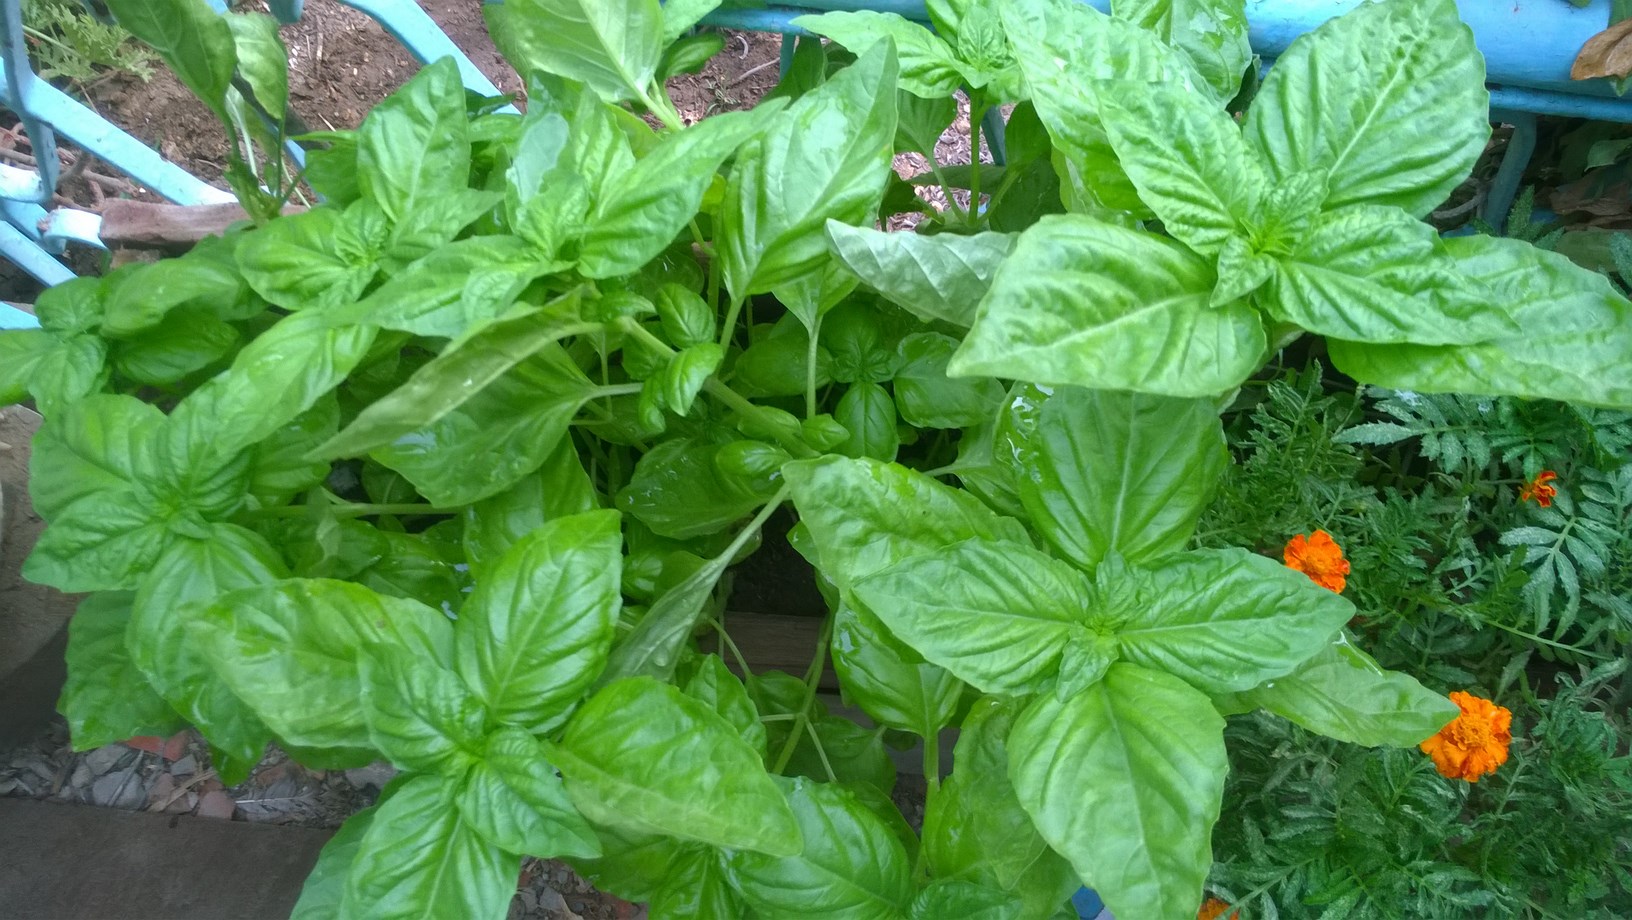 Basil is one of the easiest aromatic herbs to grow. It needs heat and sun